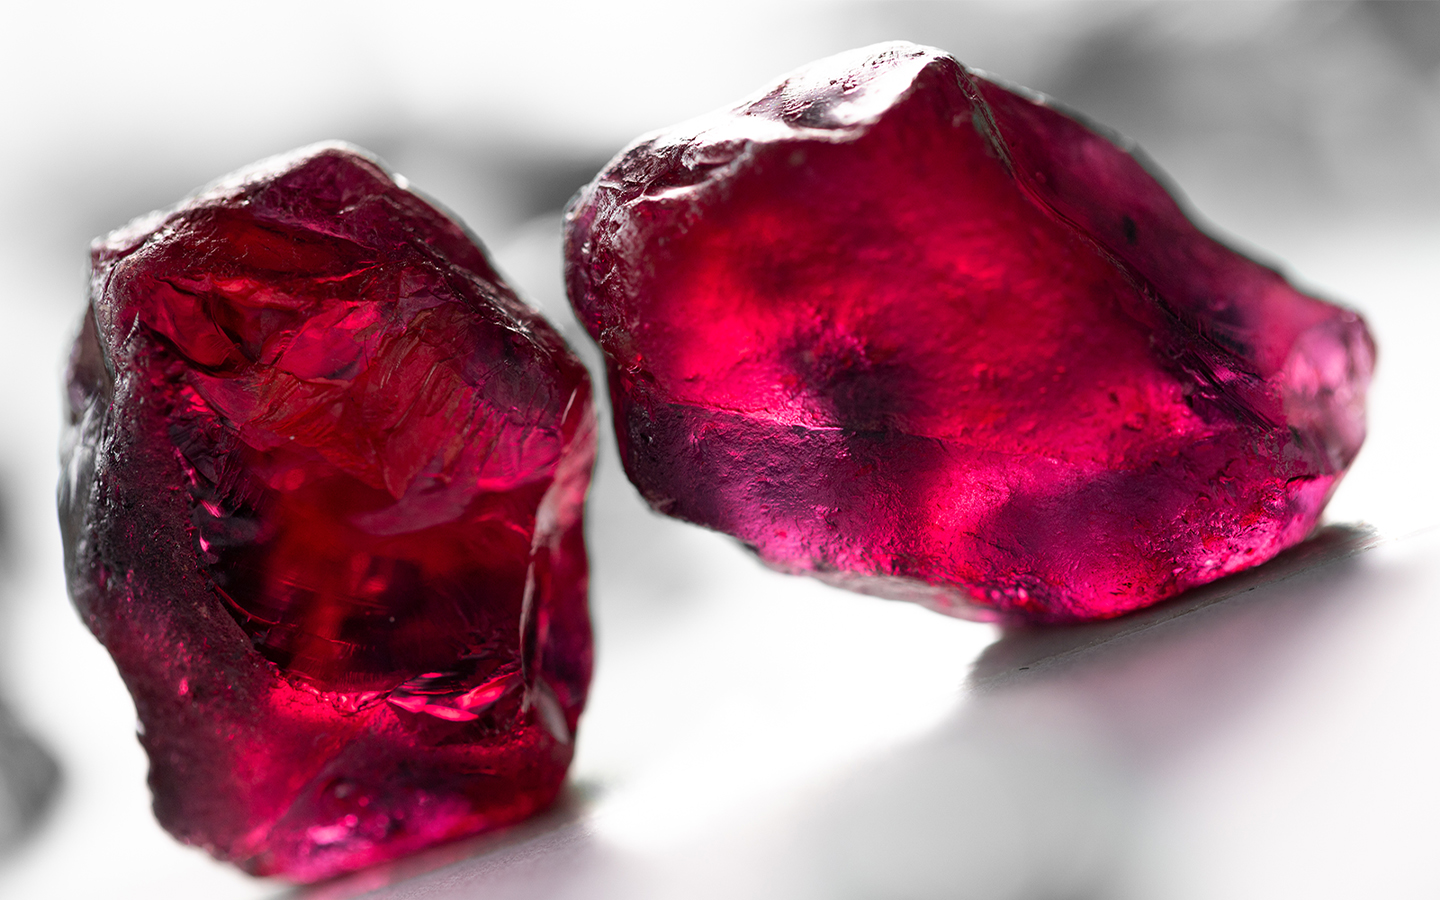 An auction of Mozambican rubies has raised US$1.47 million